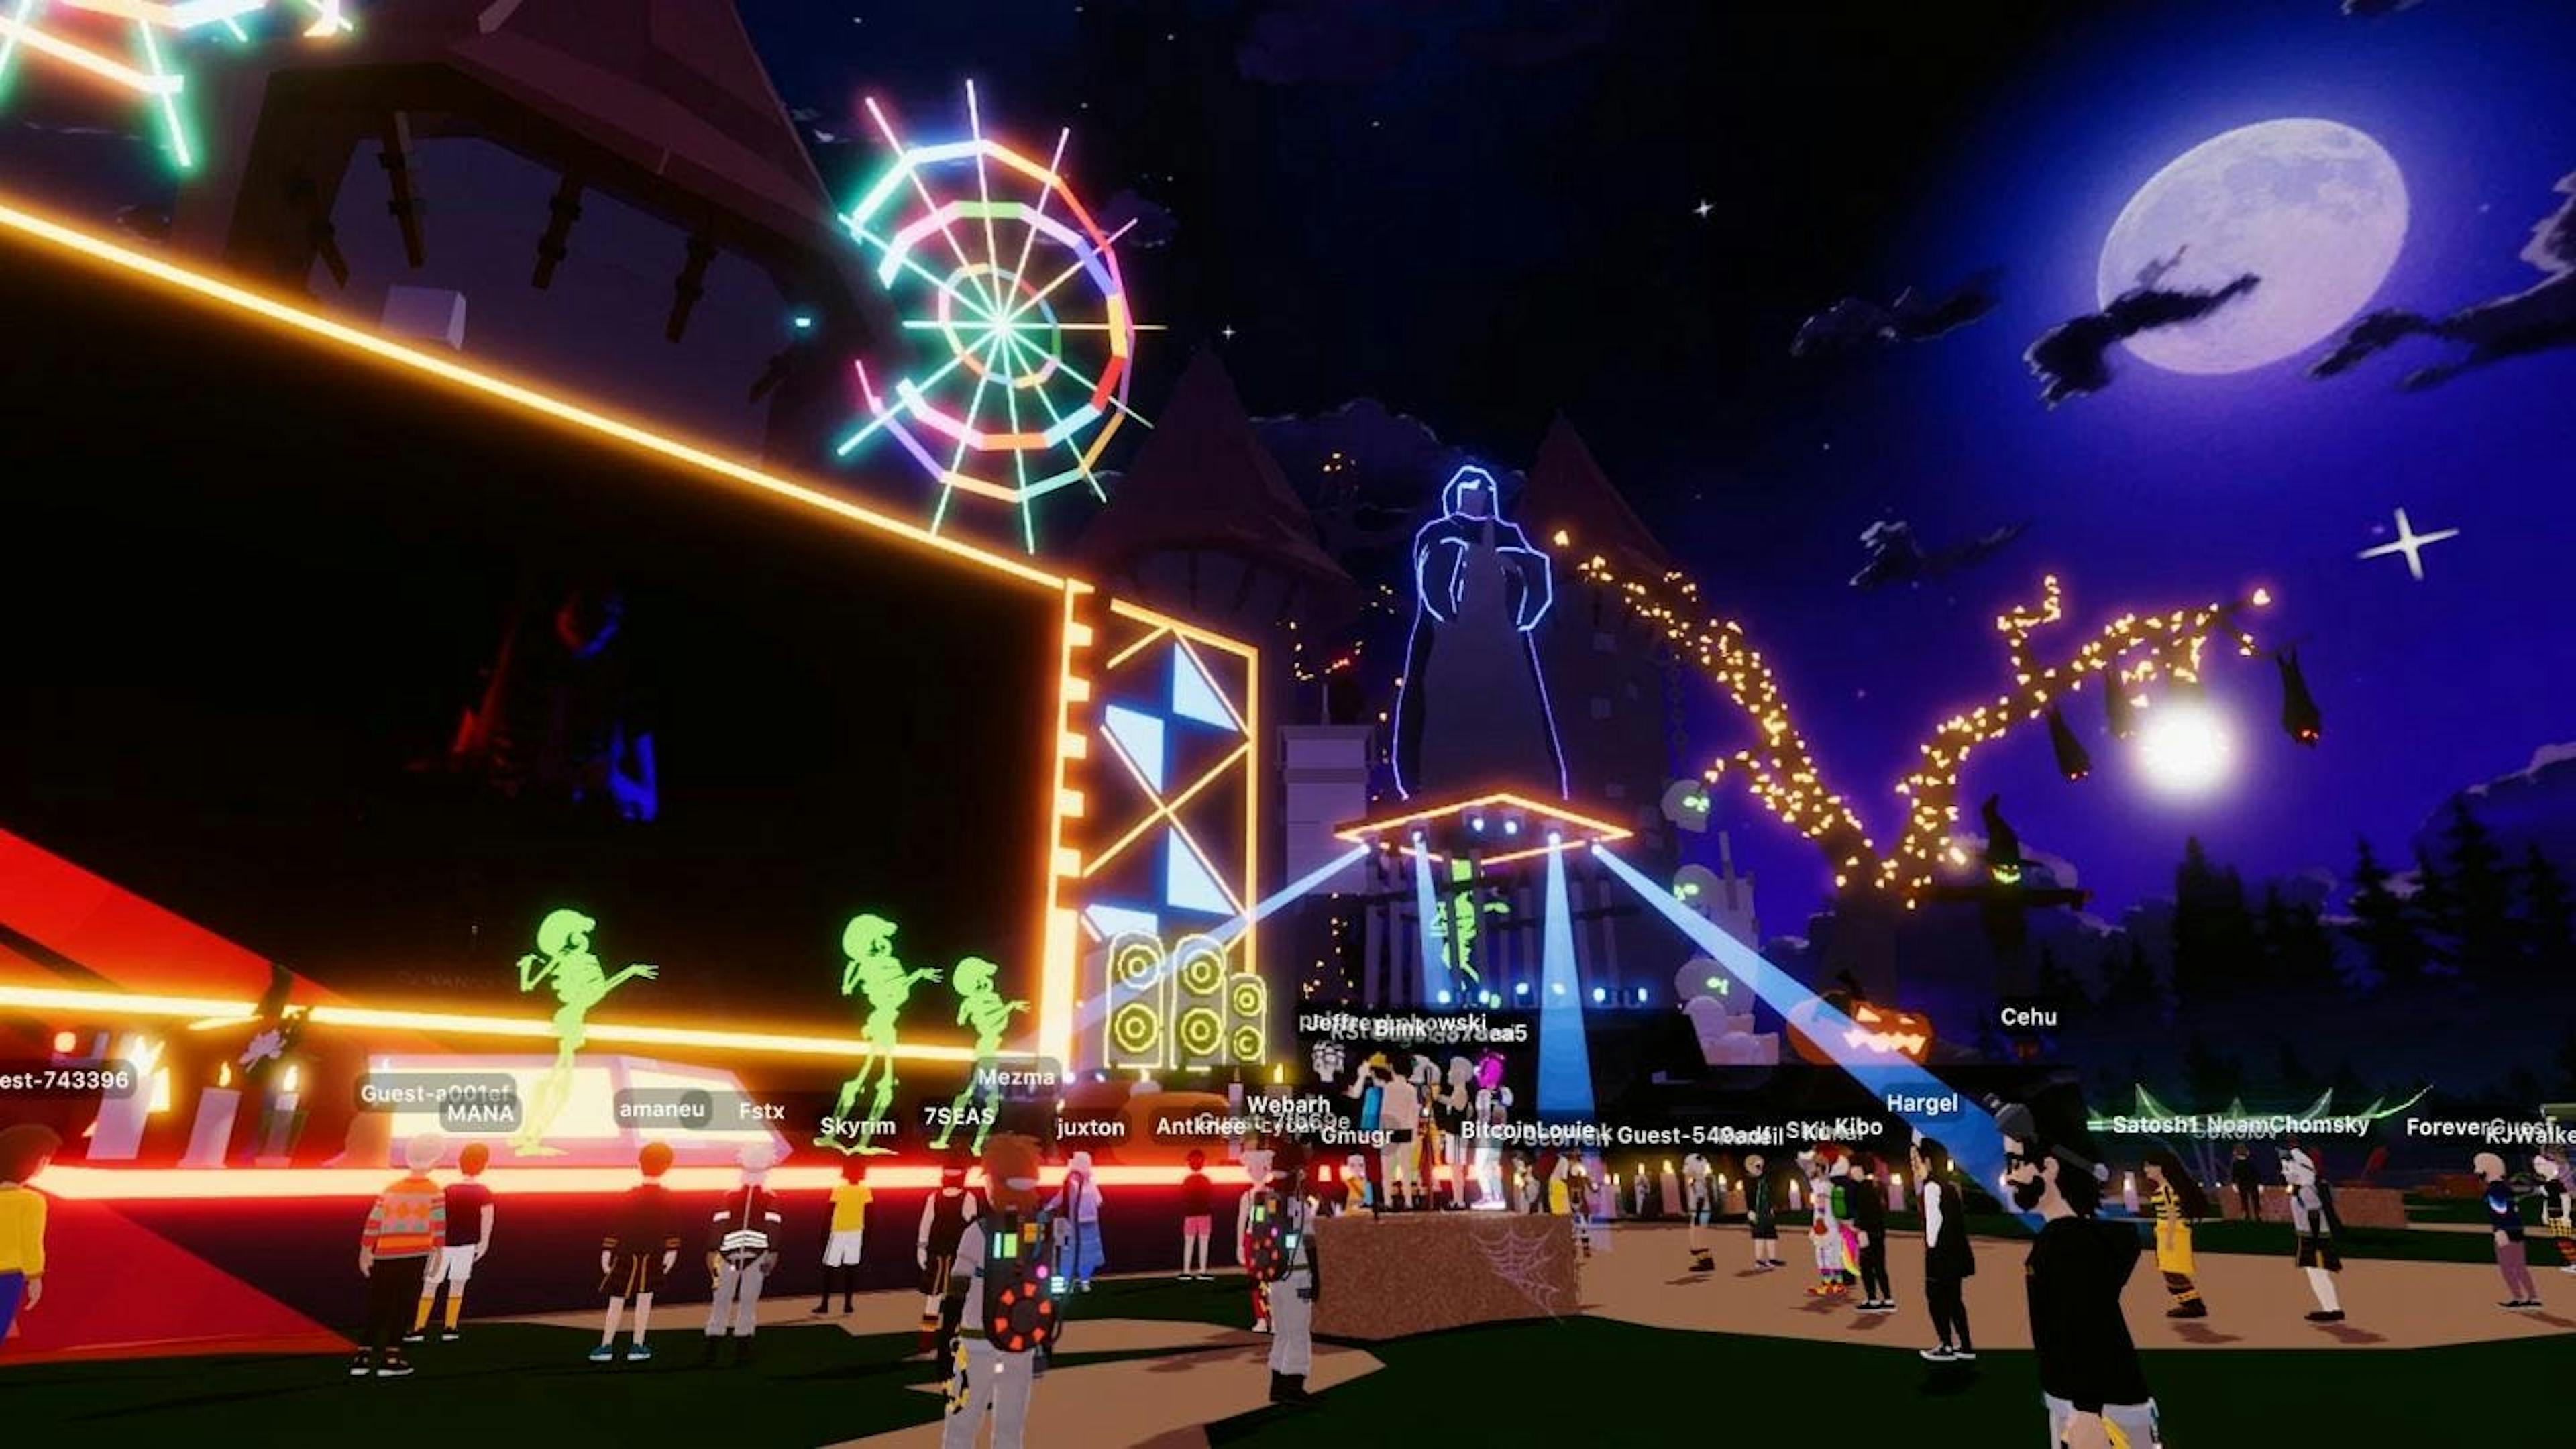 Players can visit virtual parks in Decentraland. Source: Euronews.com